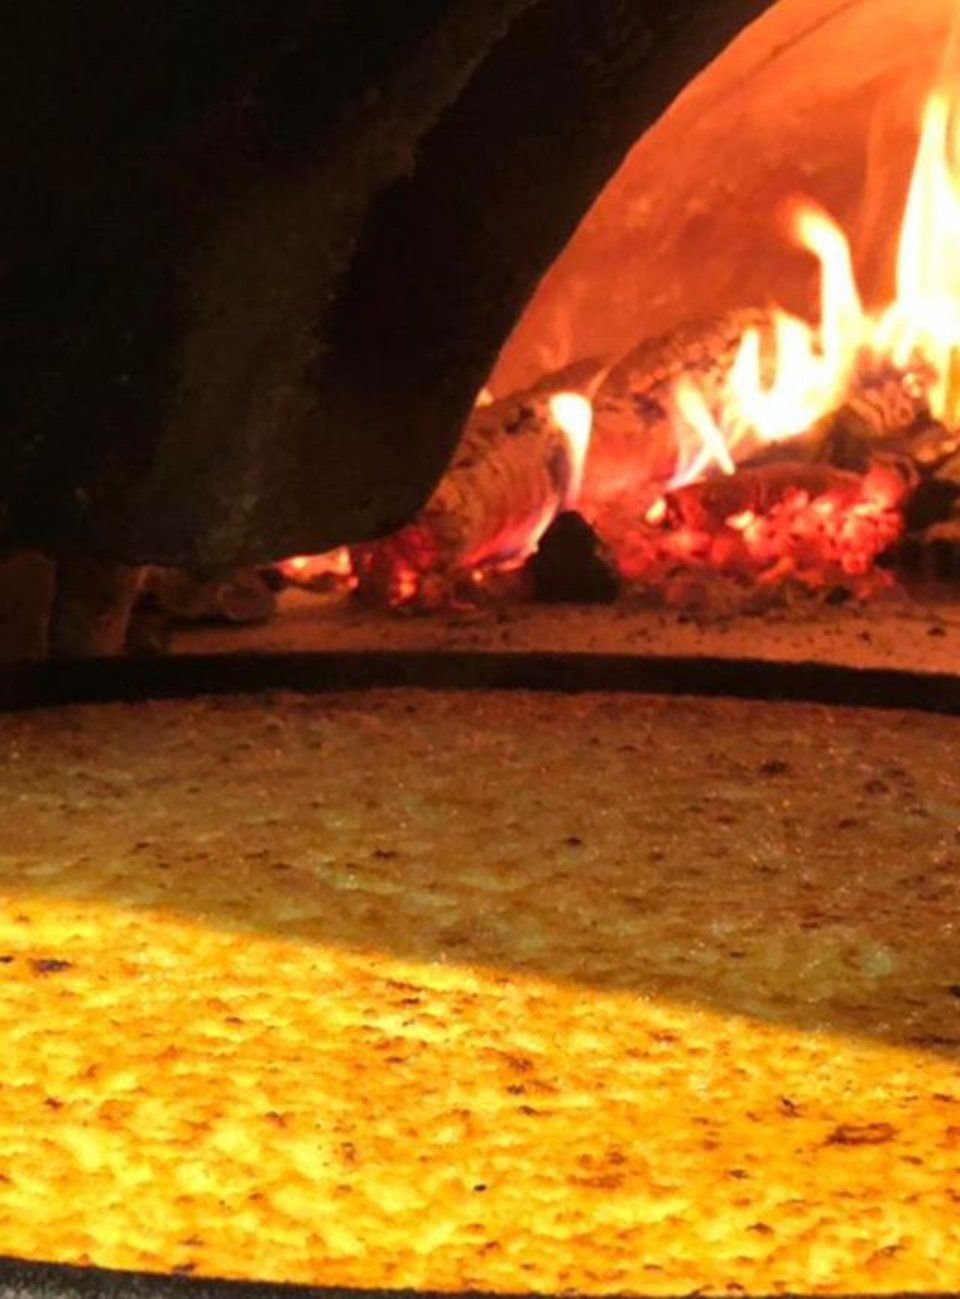 Pizza in wood-fired oven